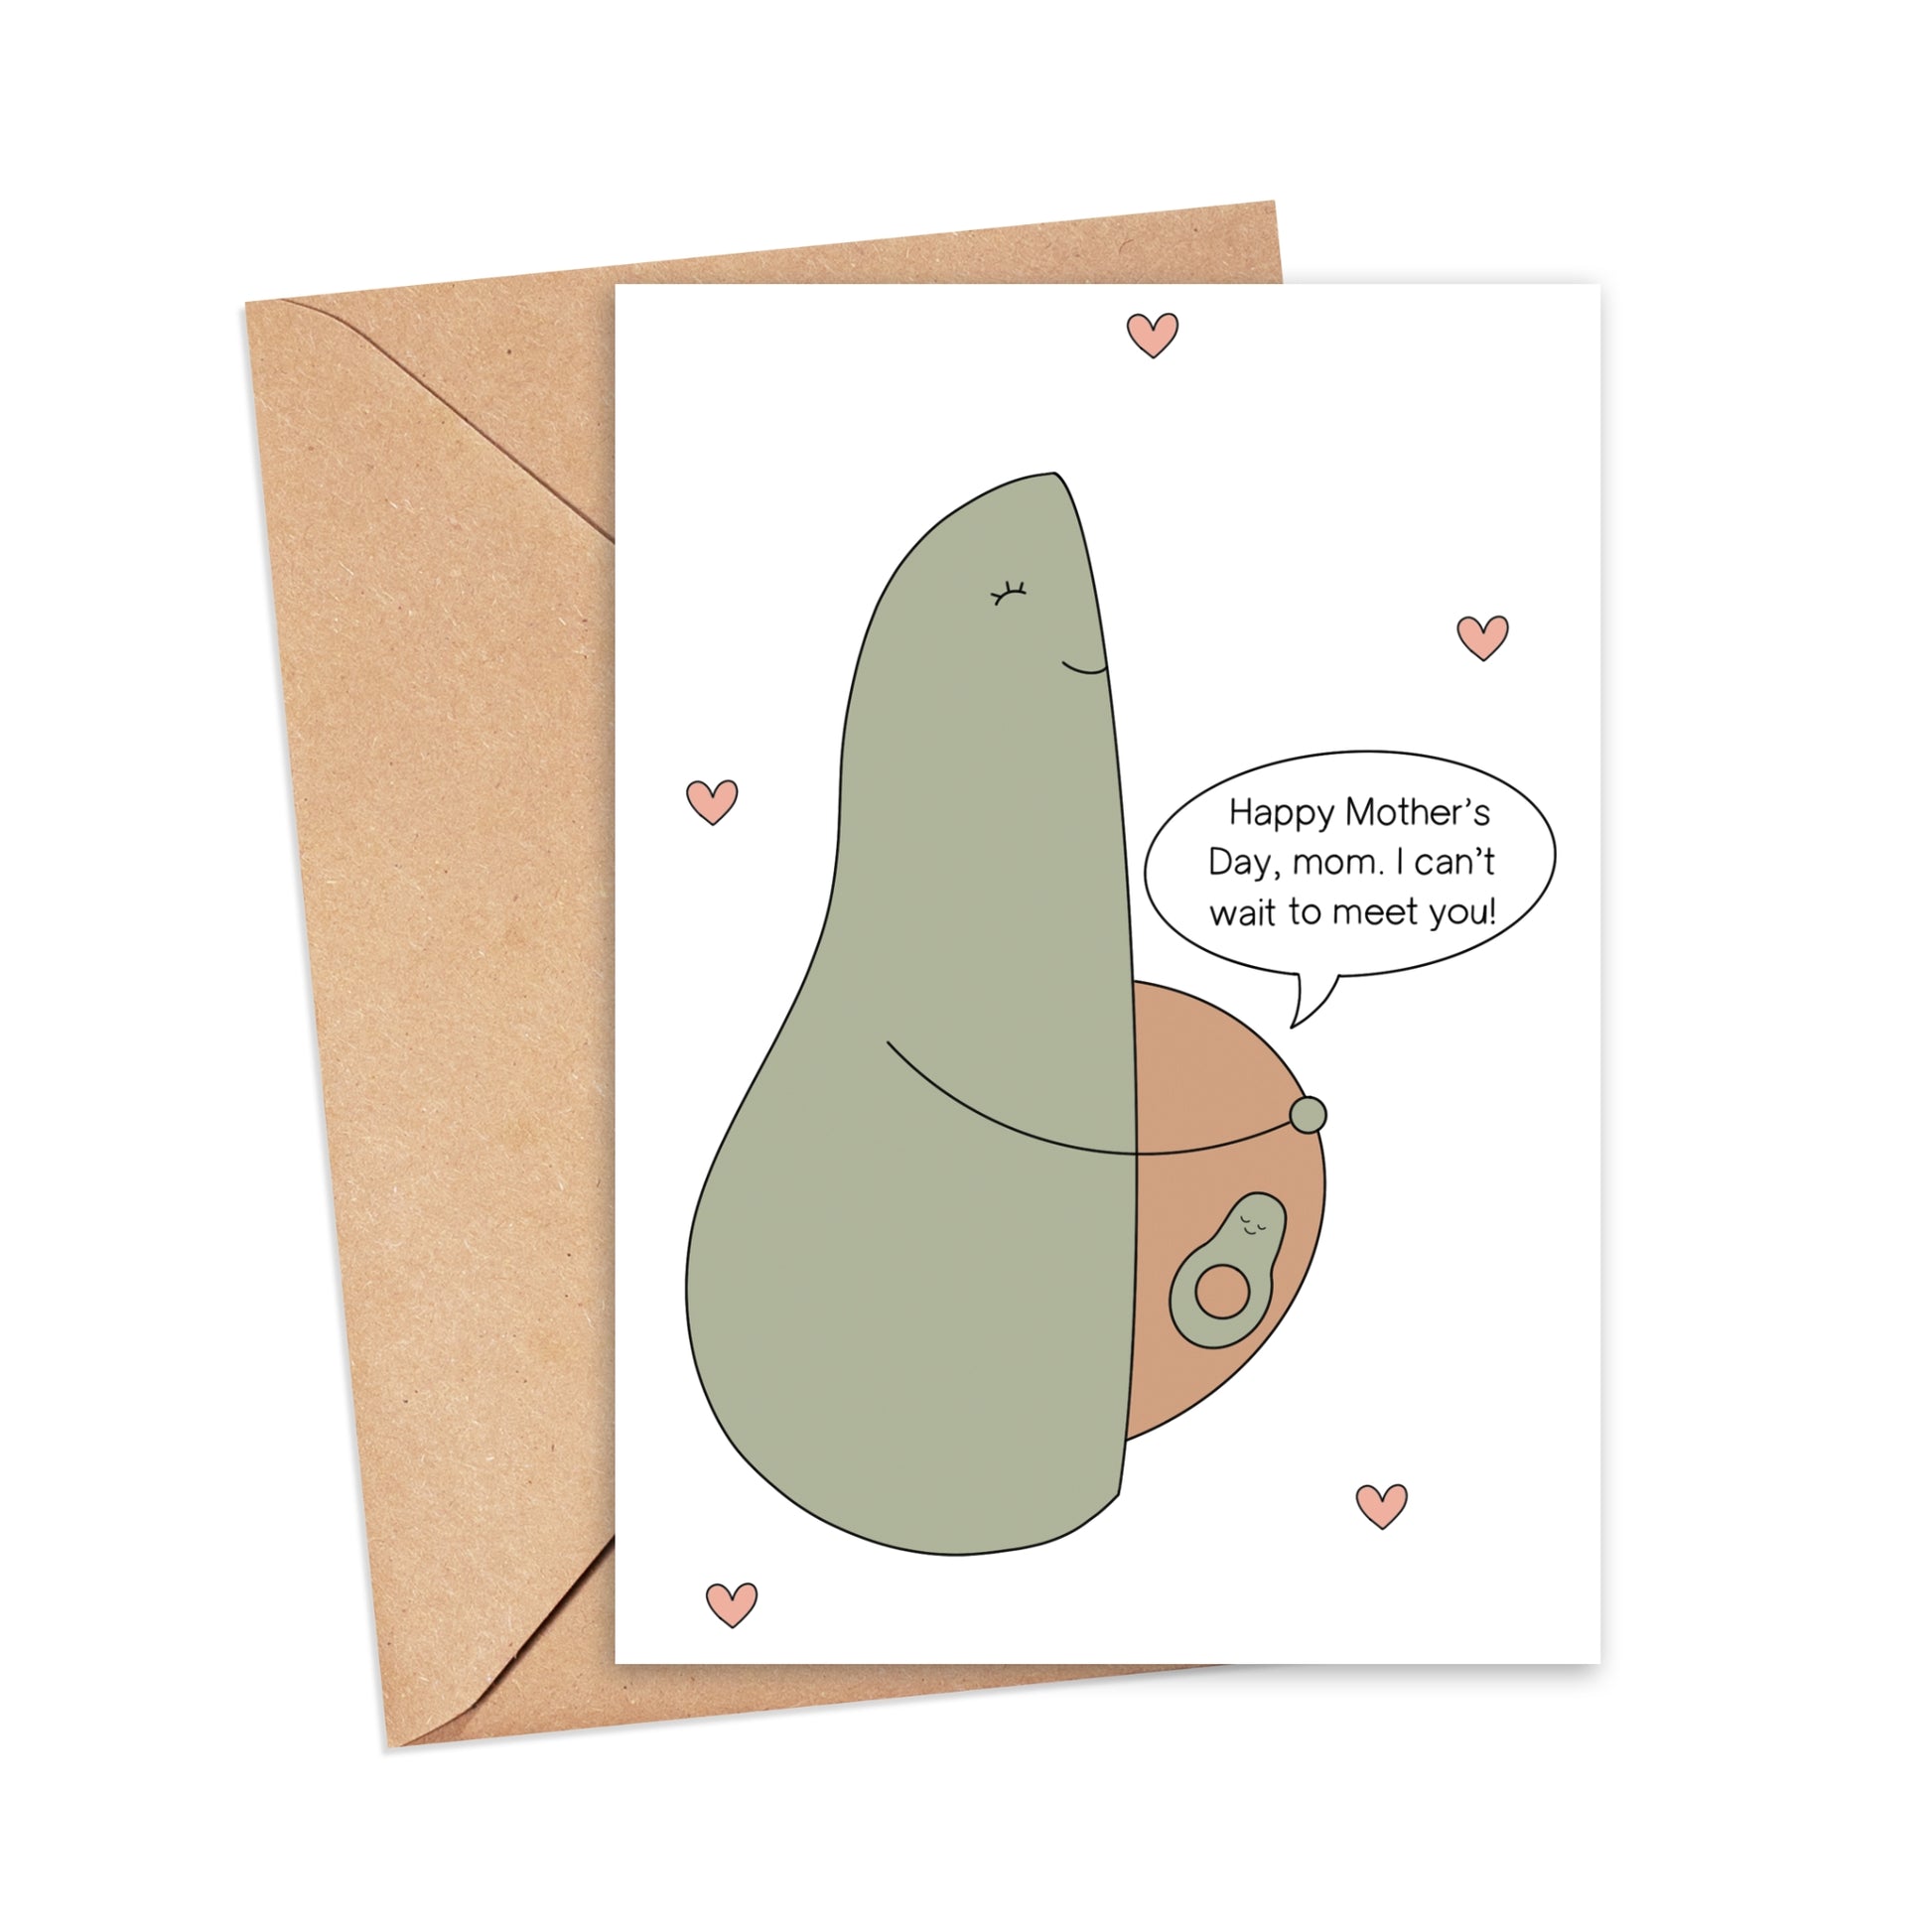 Happy Mother's Day from the Bump Card Simply Happy Cards